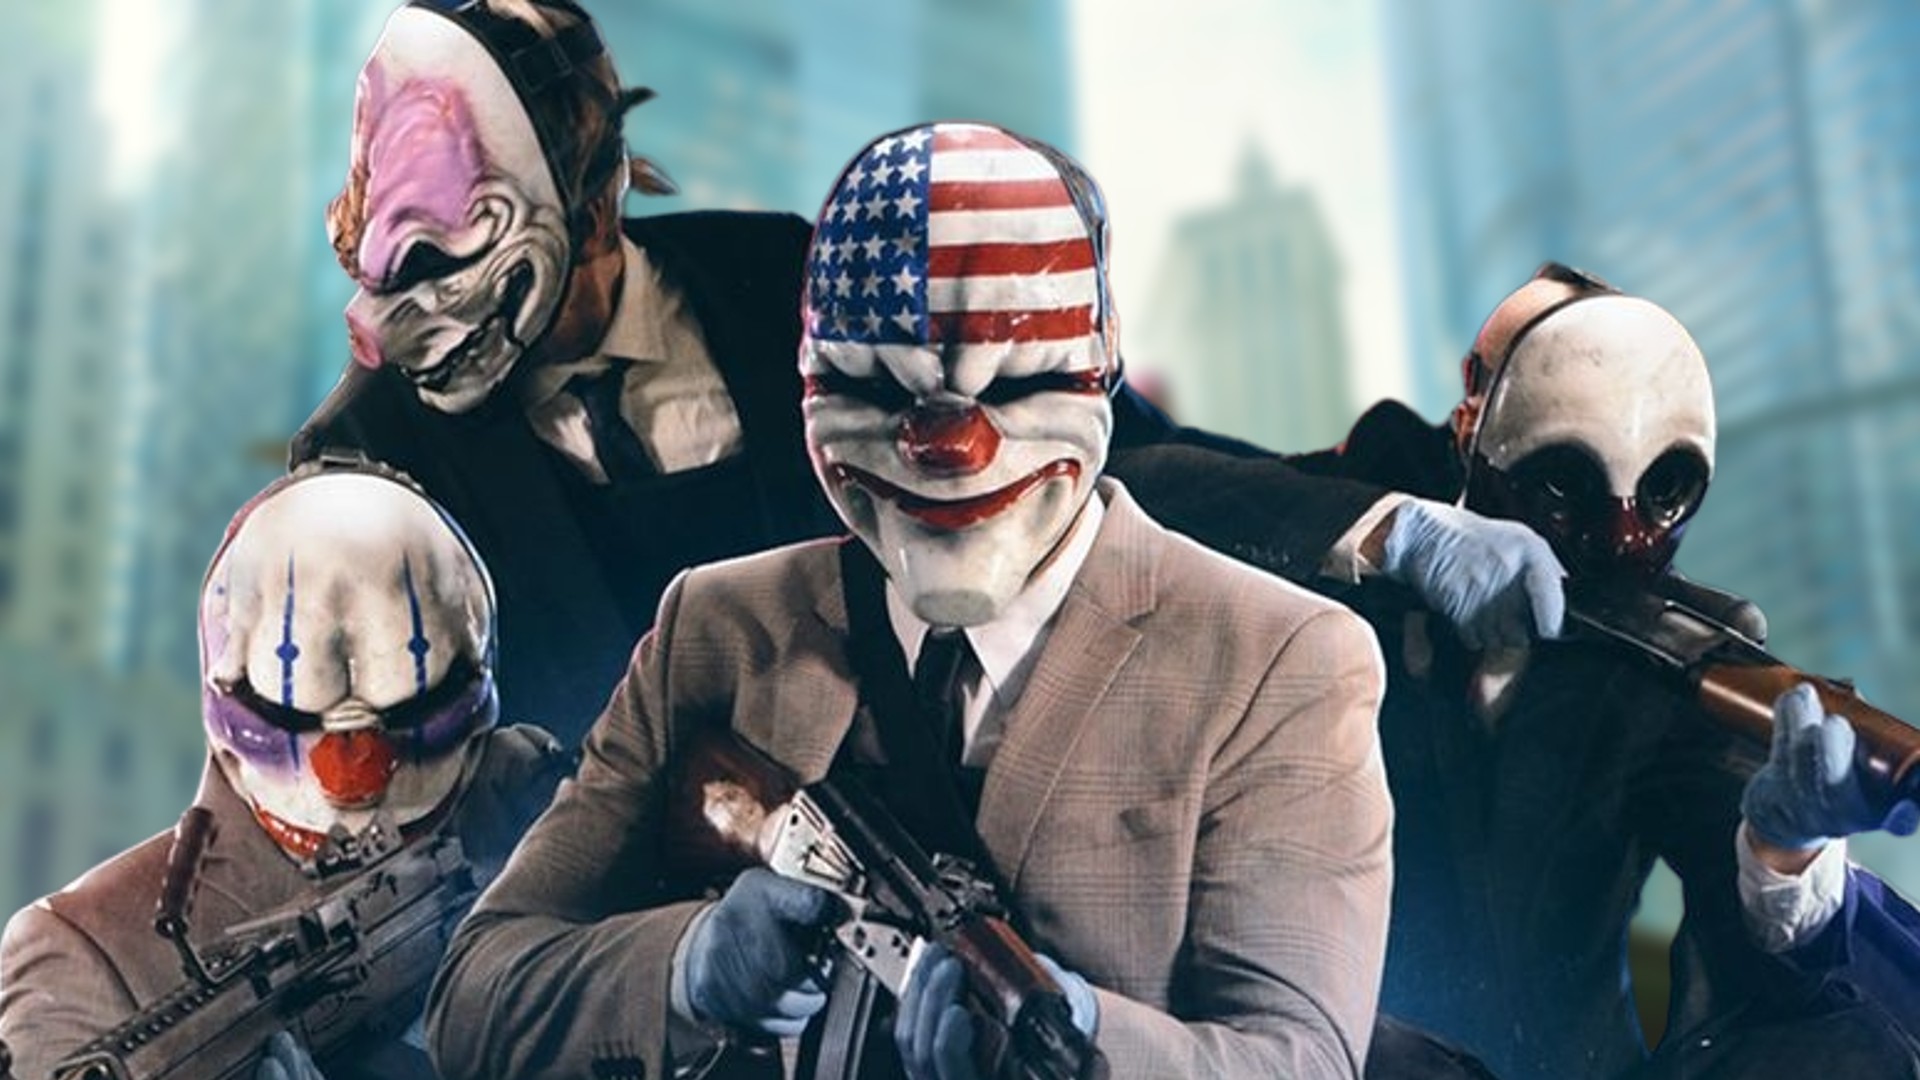 PAYDAY 3: Early Access and full release date and times, when can